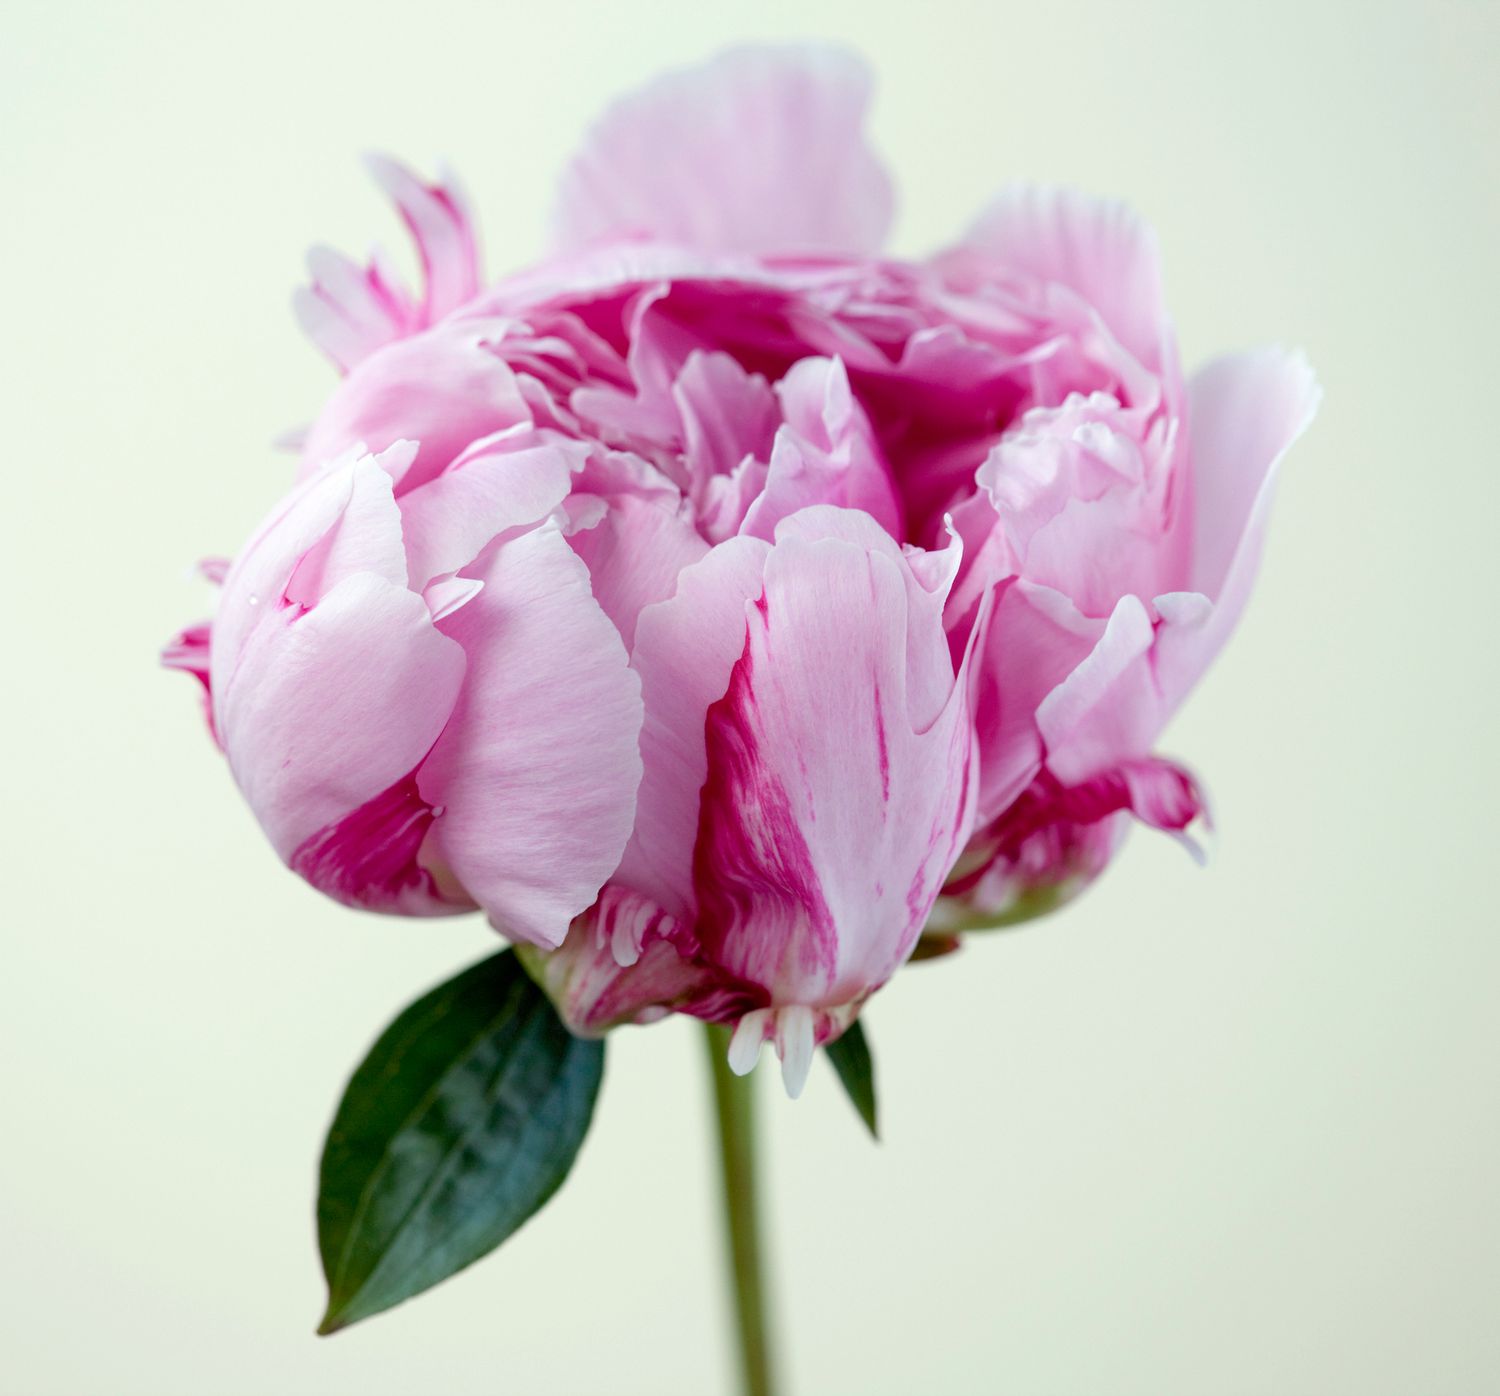 Late Spring to Early Summer: Peony